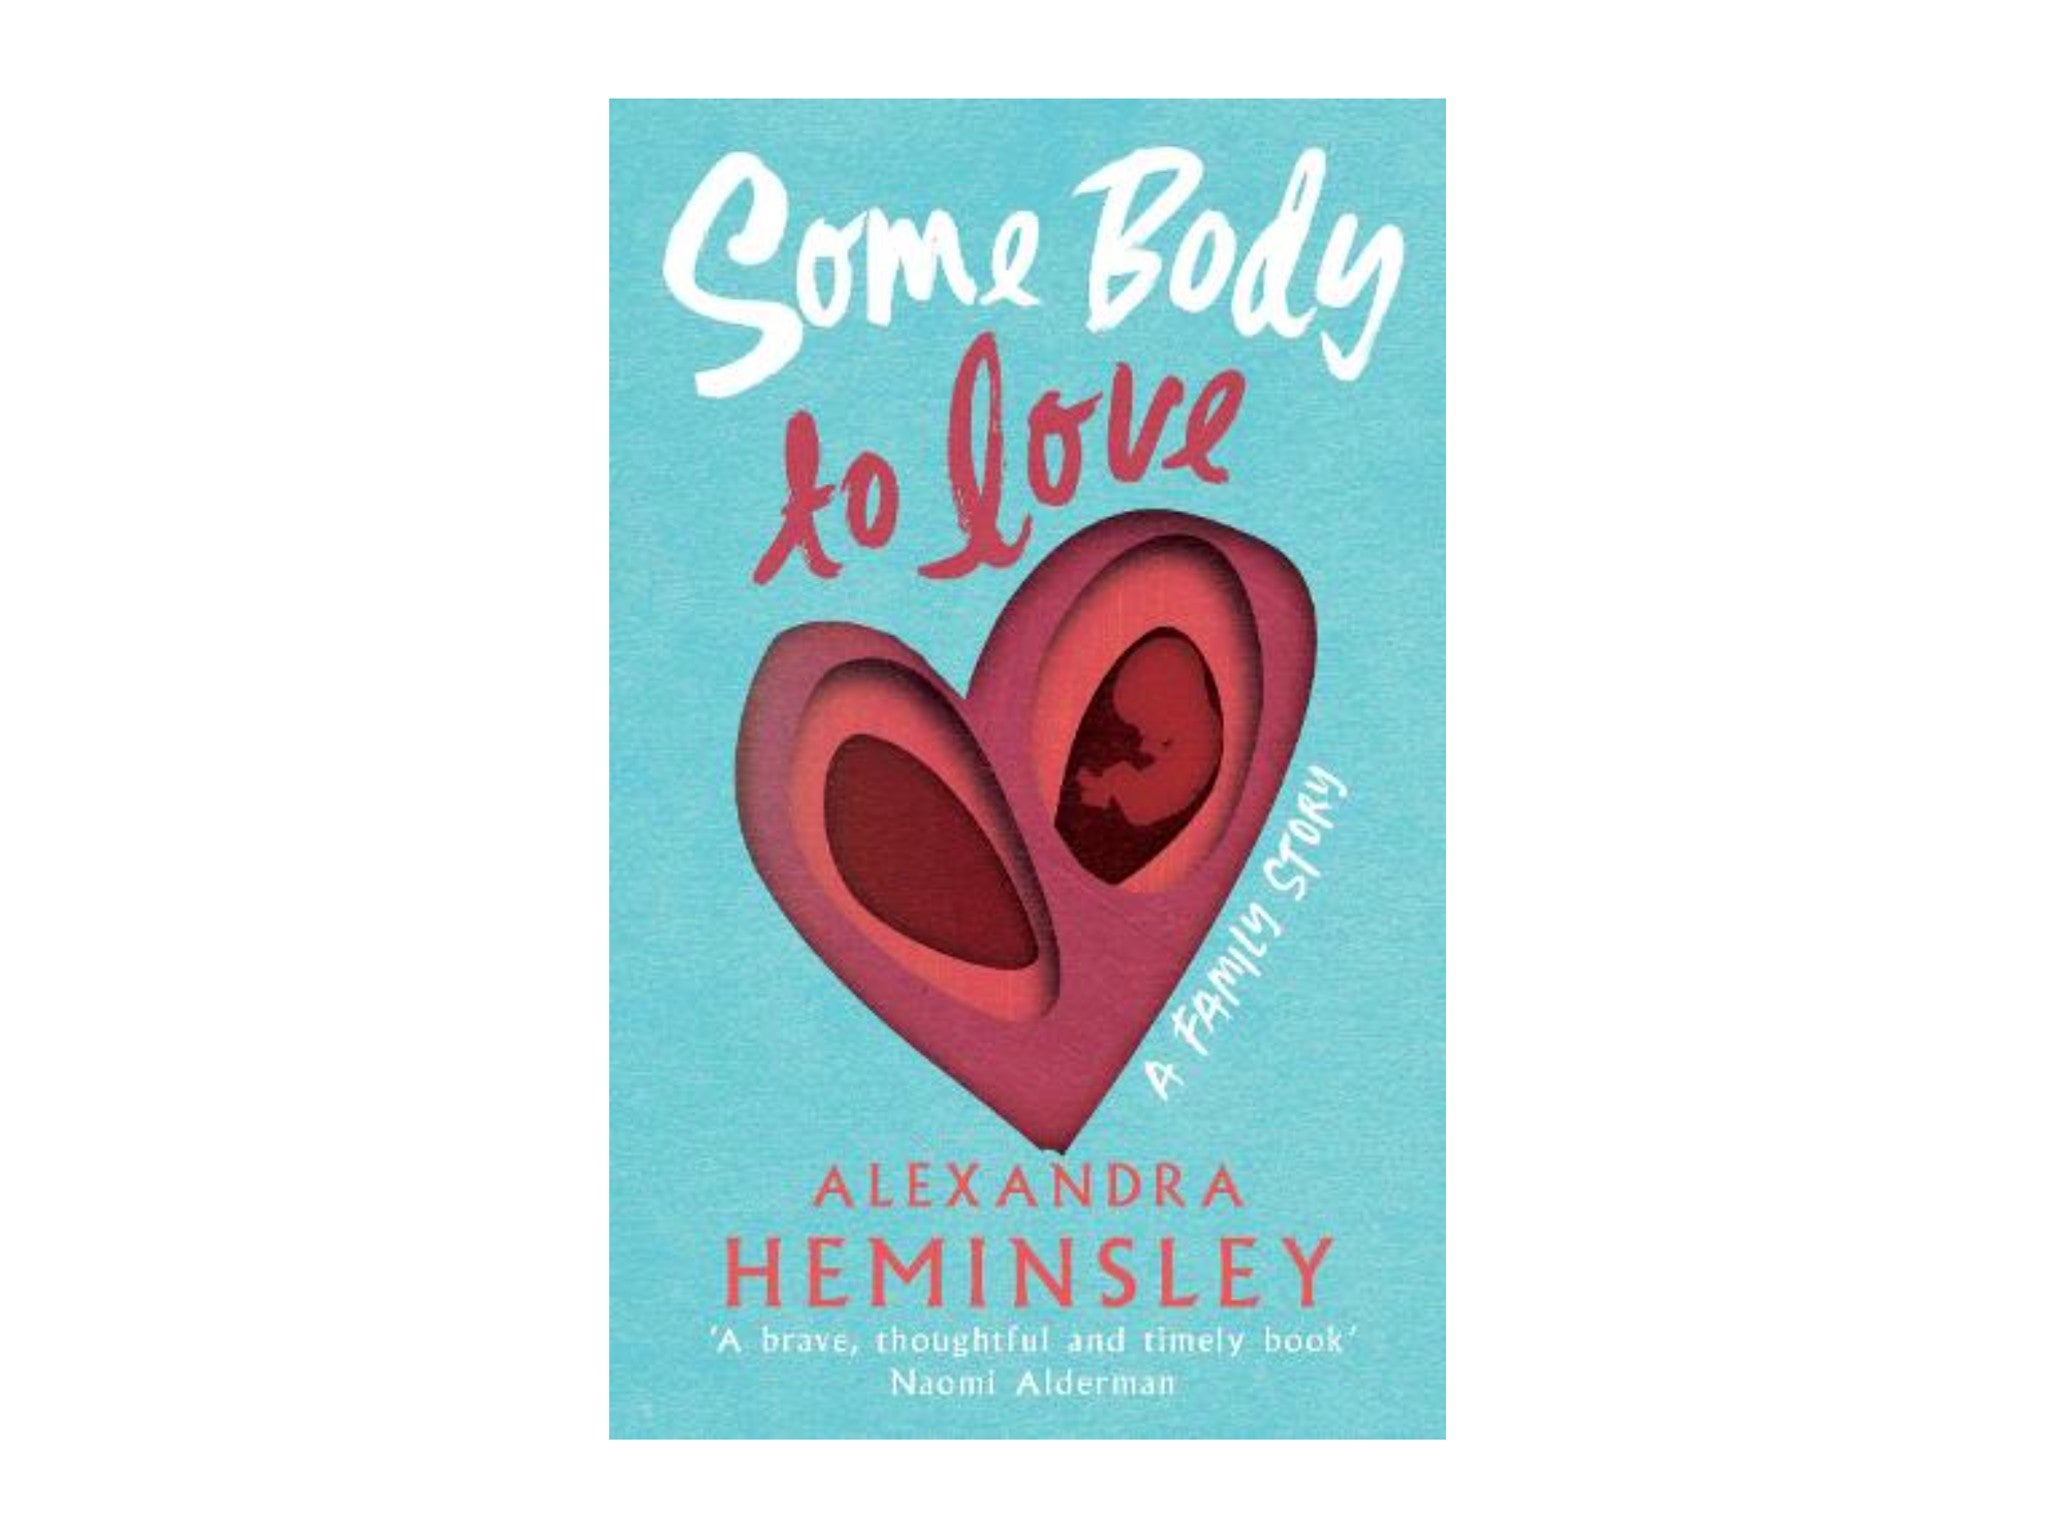 ‘Some Body to Love’ by Alexandra Heminsley, published by Vintage indybest.jpg